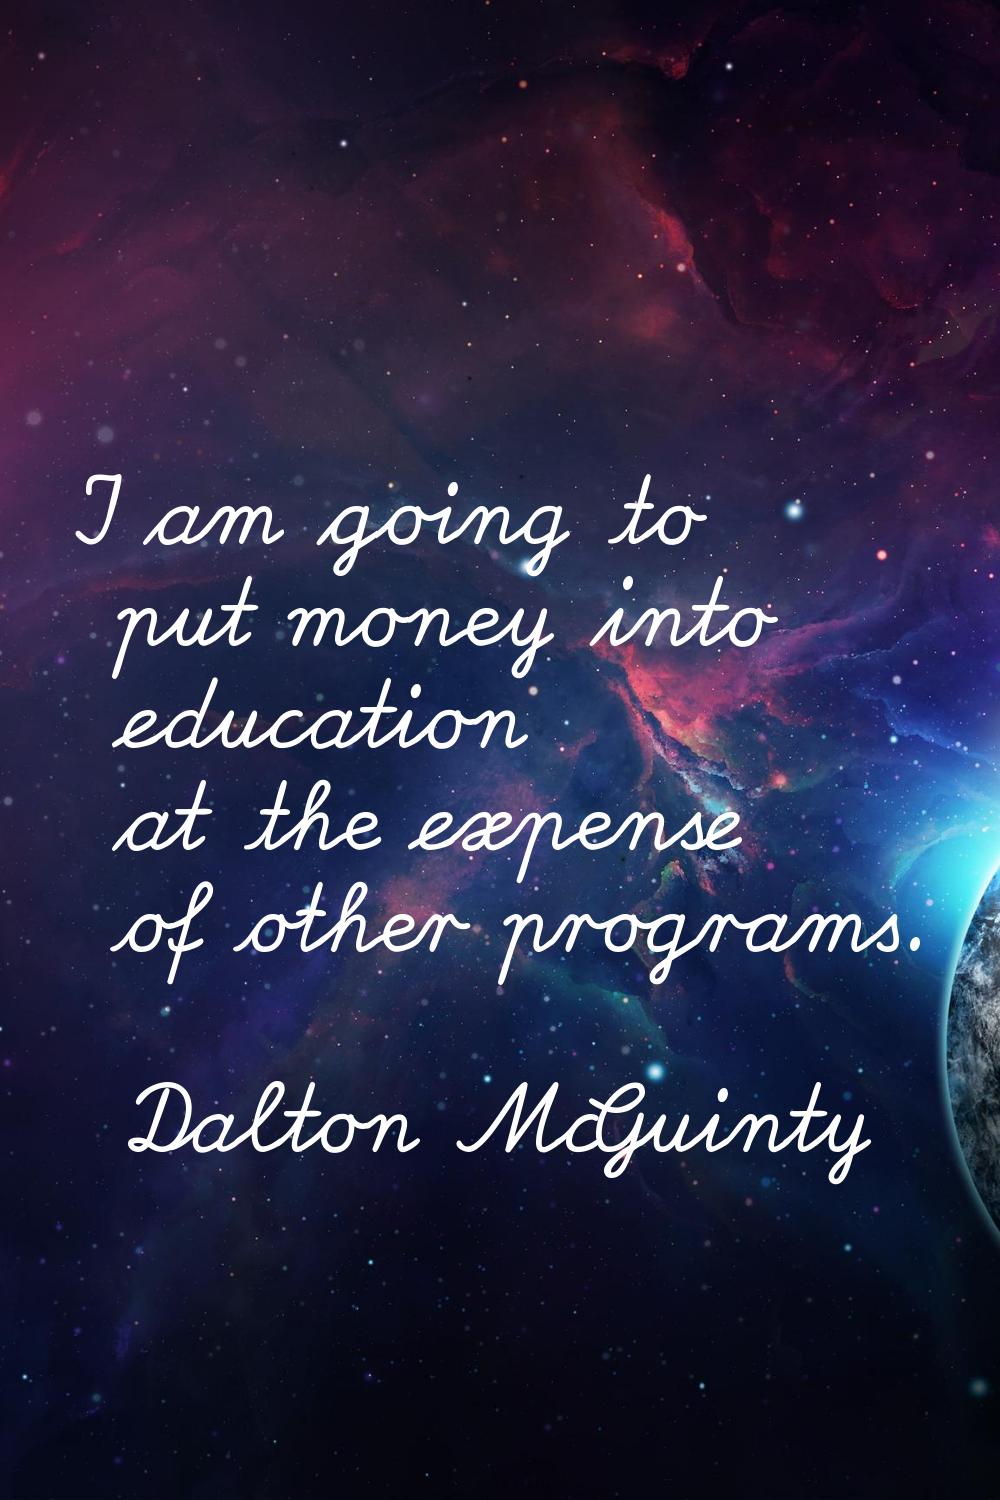 I am going to put money into education at the expense of other programs.